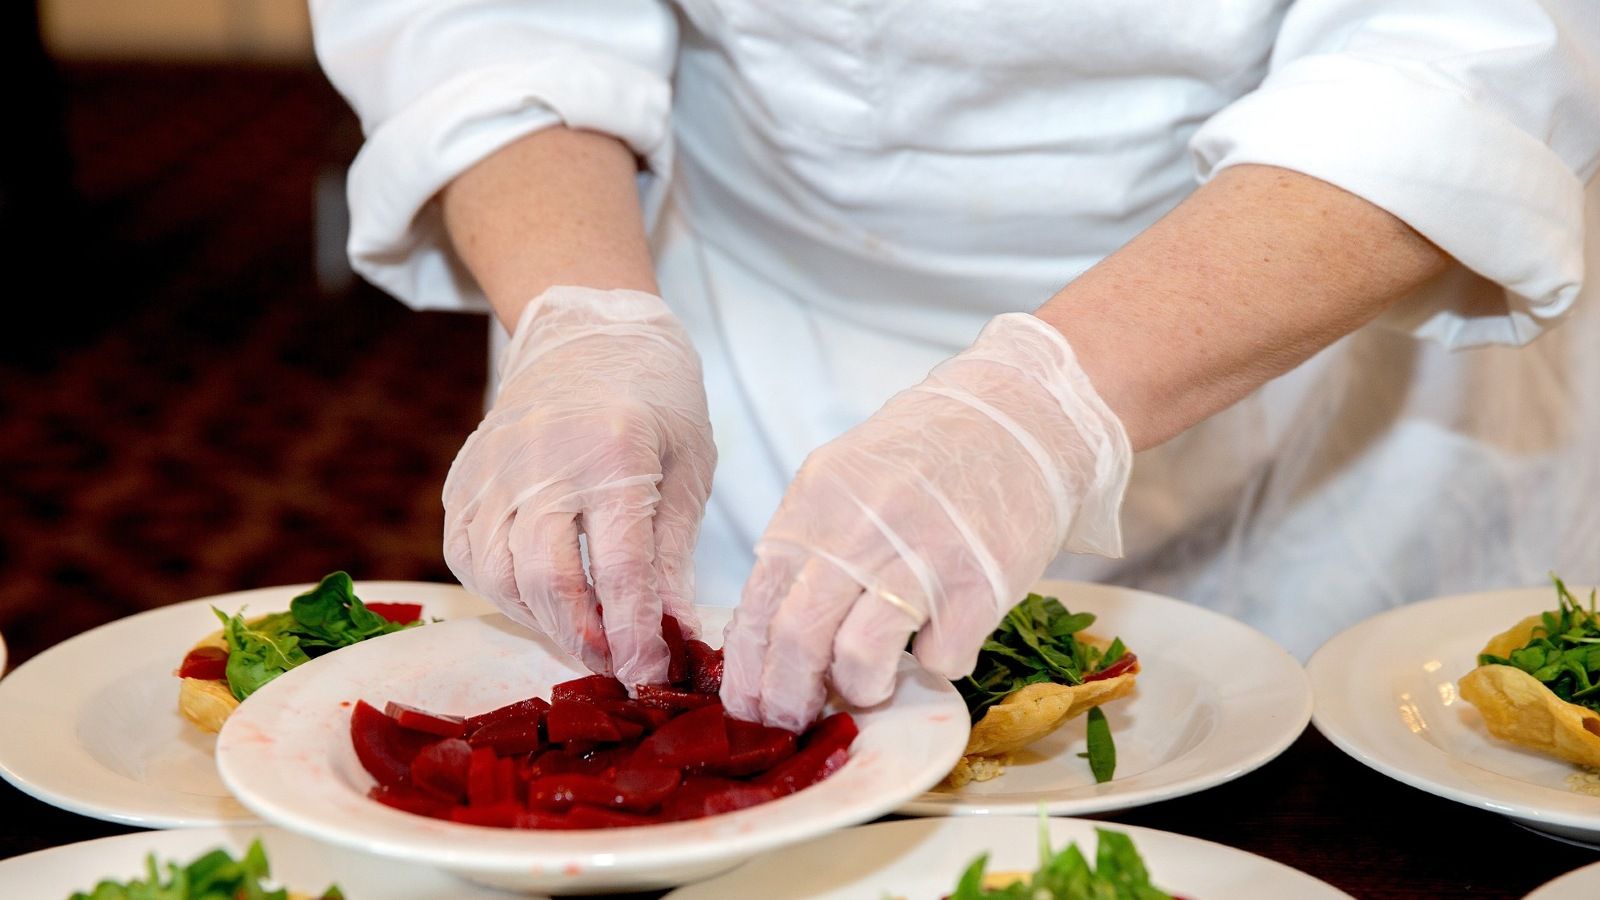 A woman's hands wearing gloves, plating a dish of food, around prepared dishes of food banner image